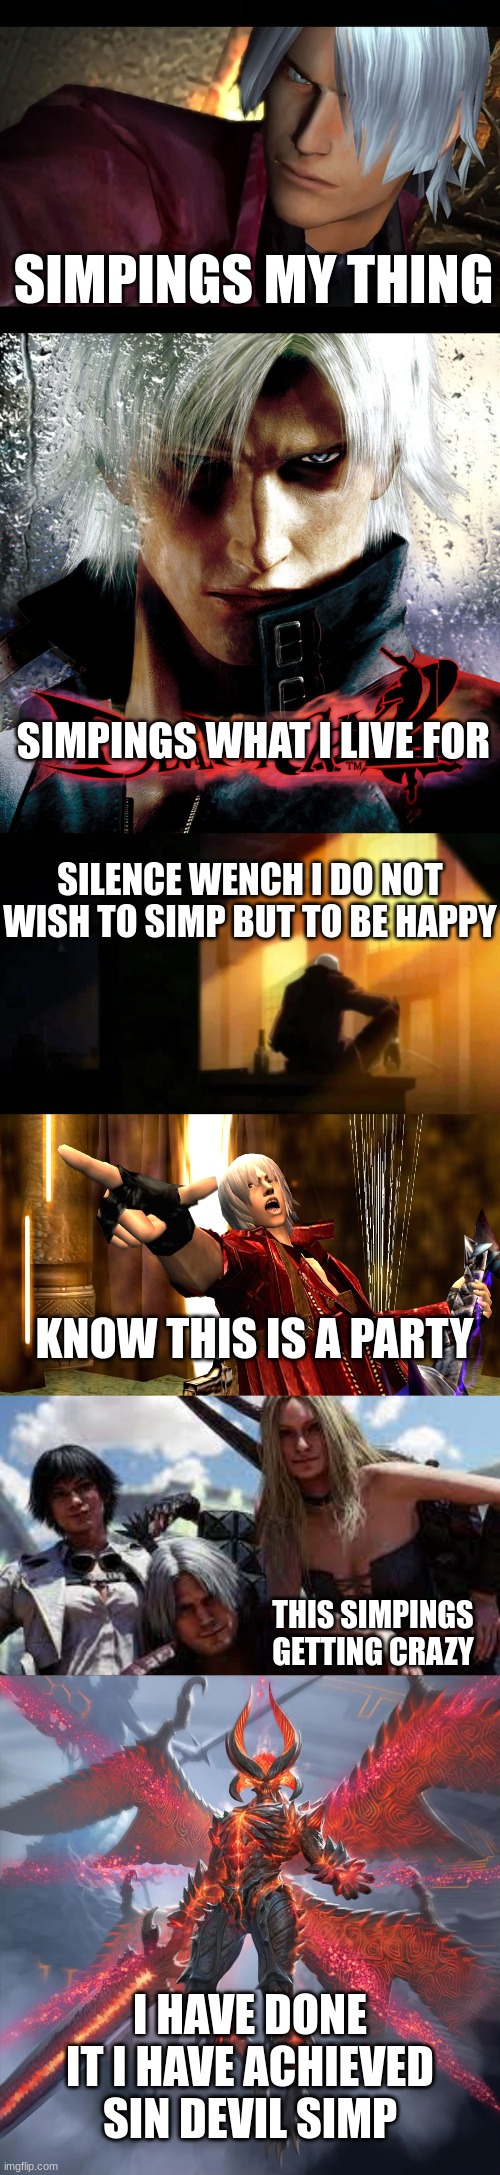 Dantes bizarre simp adventure |  SIMPINGS MY THING; SIMPINGS WHAT I LIVE FOR; SILENCE WENCH I DO NOT WISH TO SIMP BUT TO BE HAPPY; KNOW THIS IS A PARTY; THIS SIMPINGS GETTING CRAZY; I HAVE DONE IT I HAVE ACHIEVED SIN DEVIL SIMP | image tagged in dante,simp,devil may cry,trish,lady,memes | made w/ Imgflip meme maker